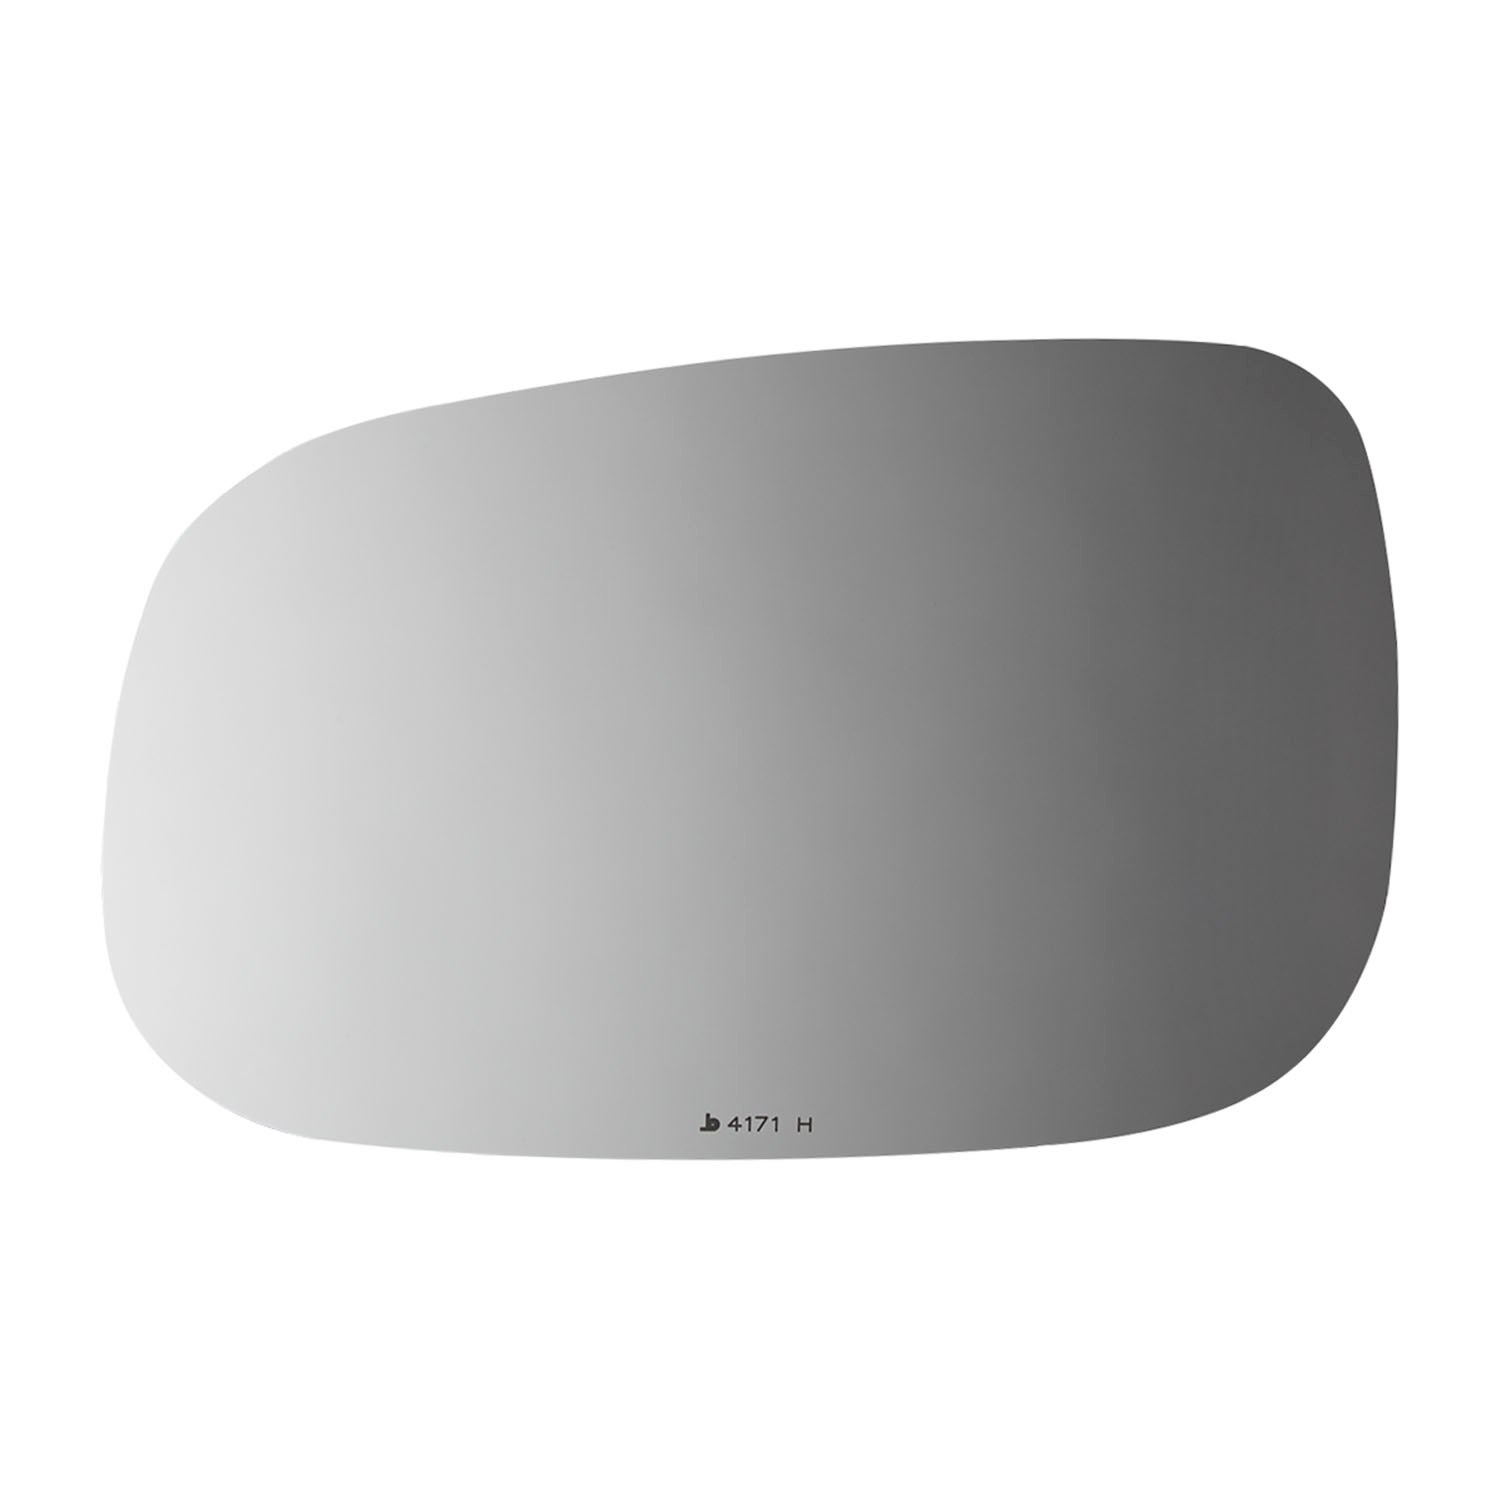 4171H HEATED SIDE VIEW MIRROR